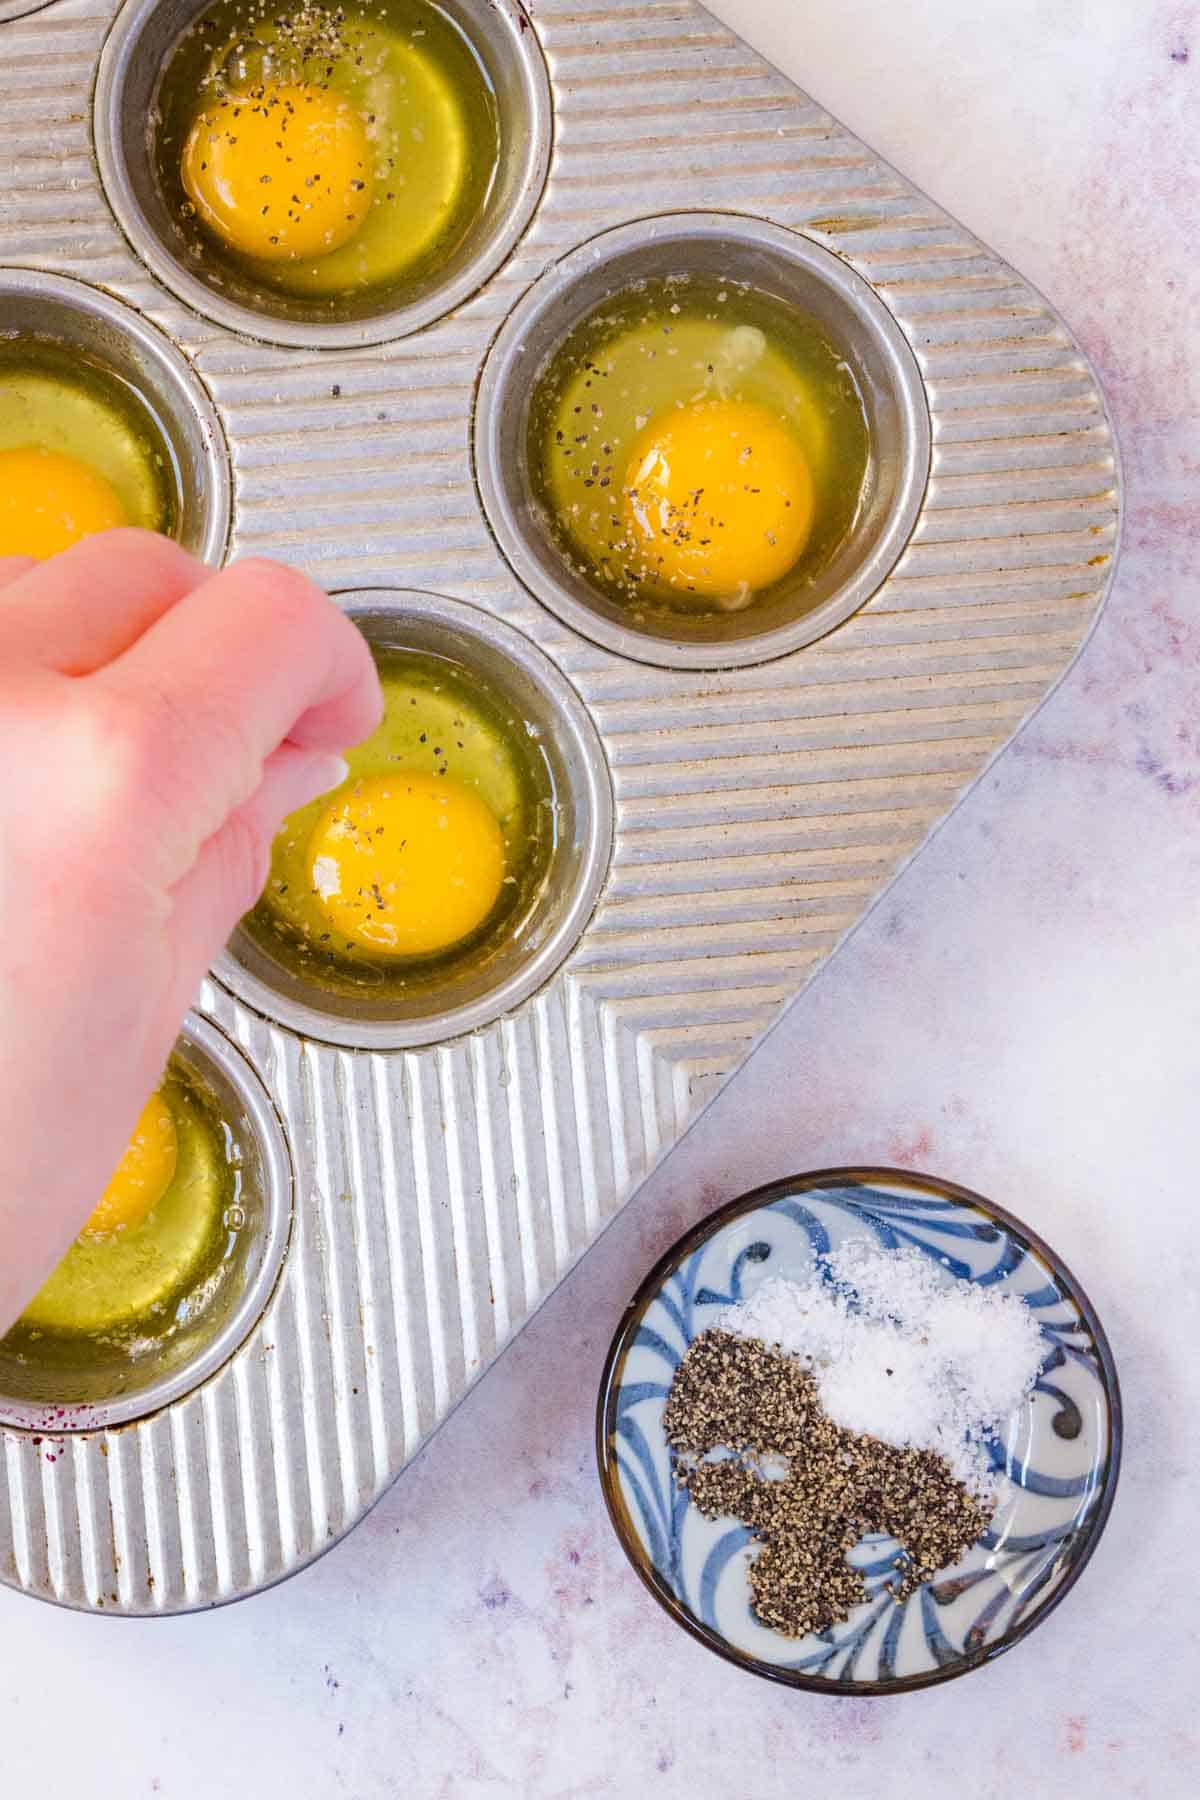 A hand sprinkles seasoning overtop of raw eggs in the wells of a metal muffin tin.